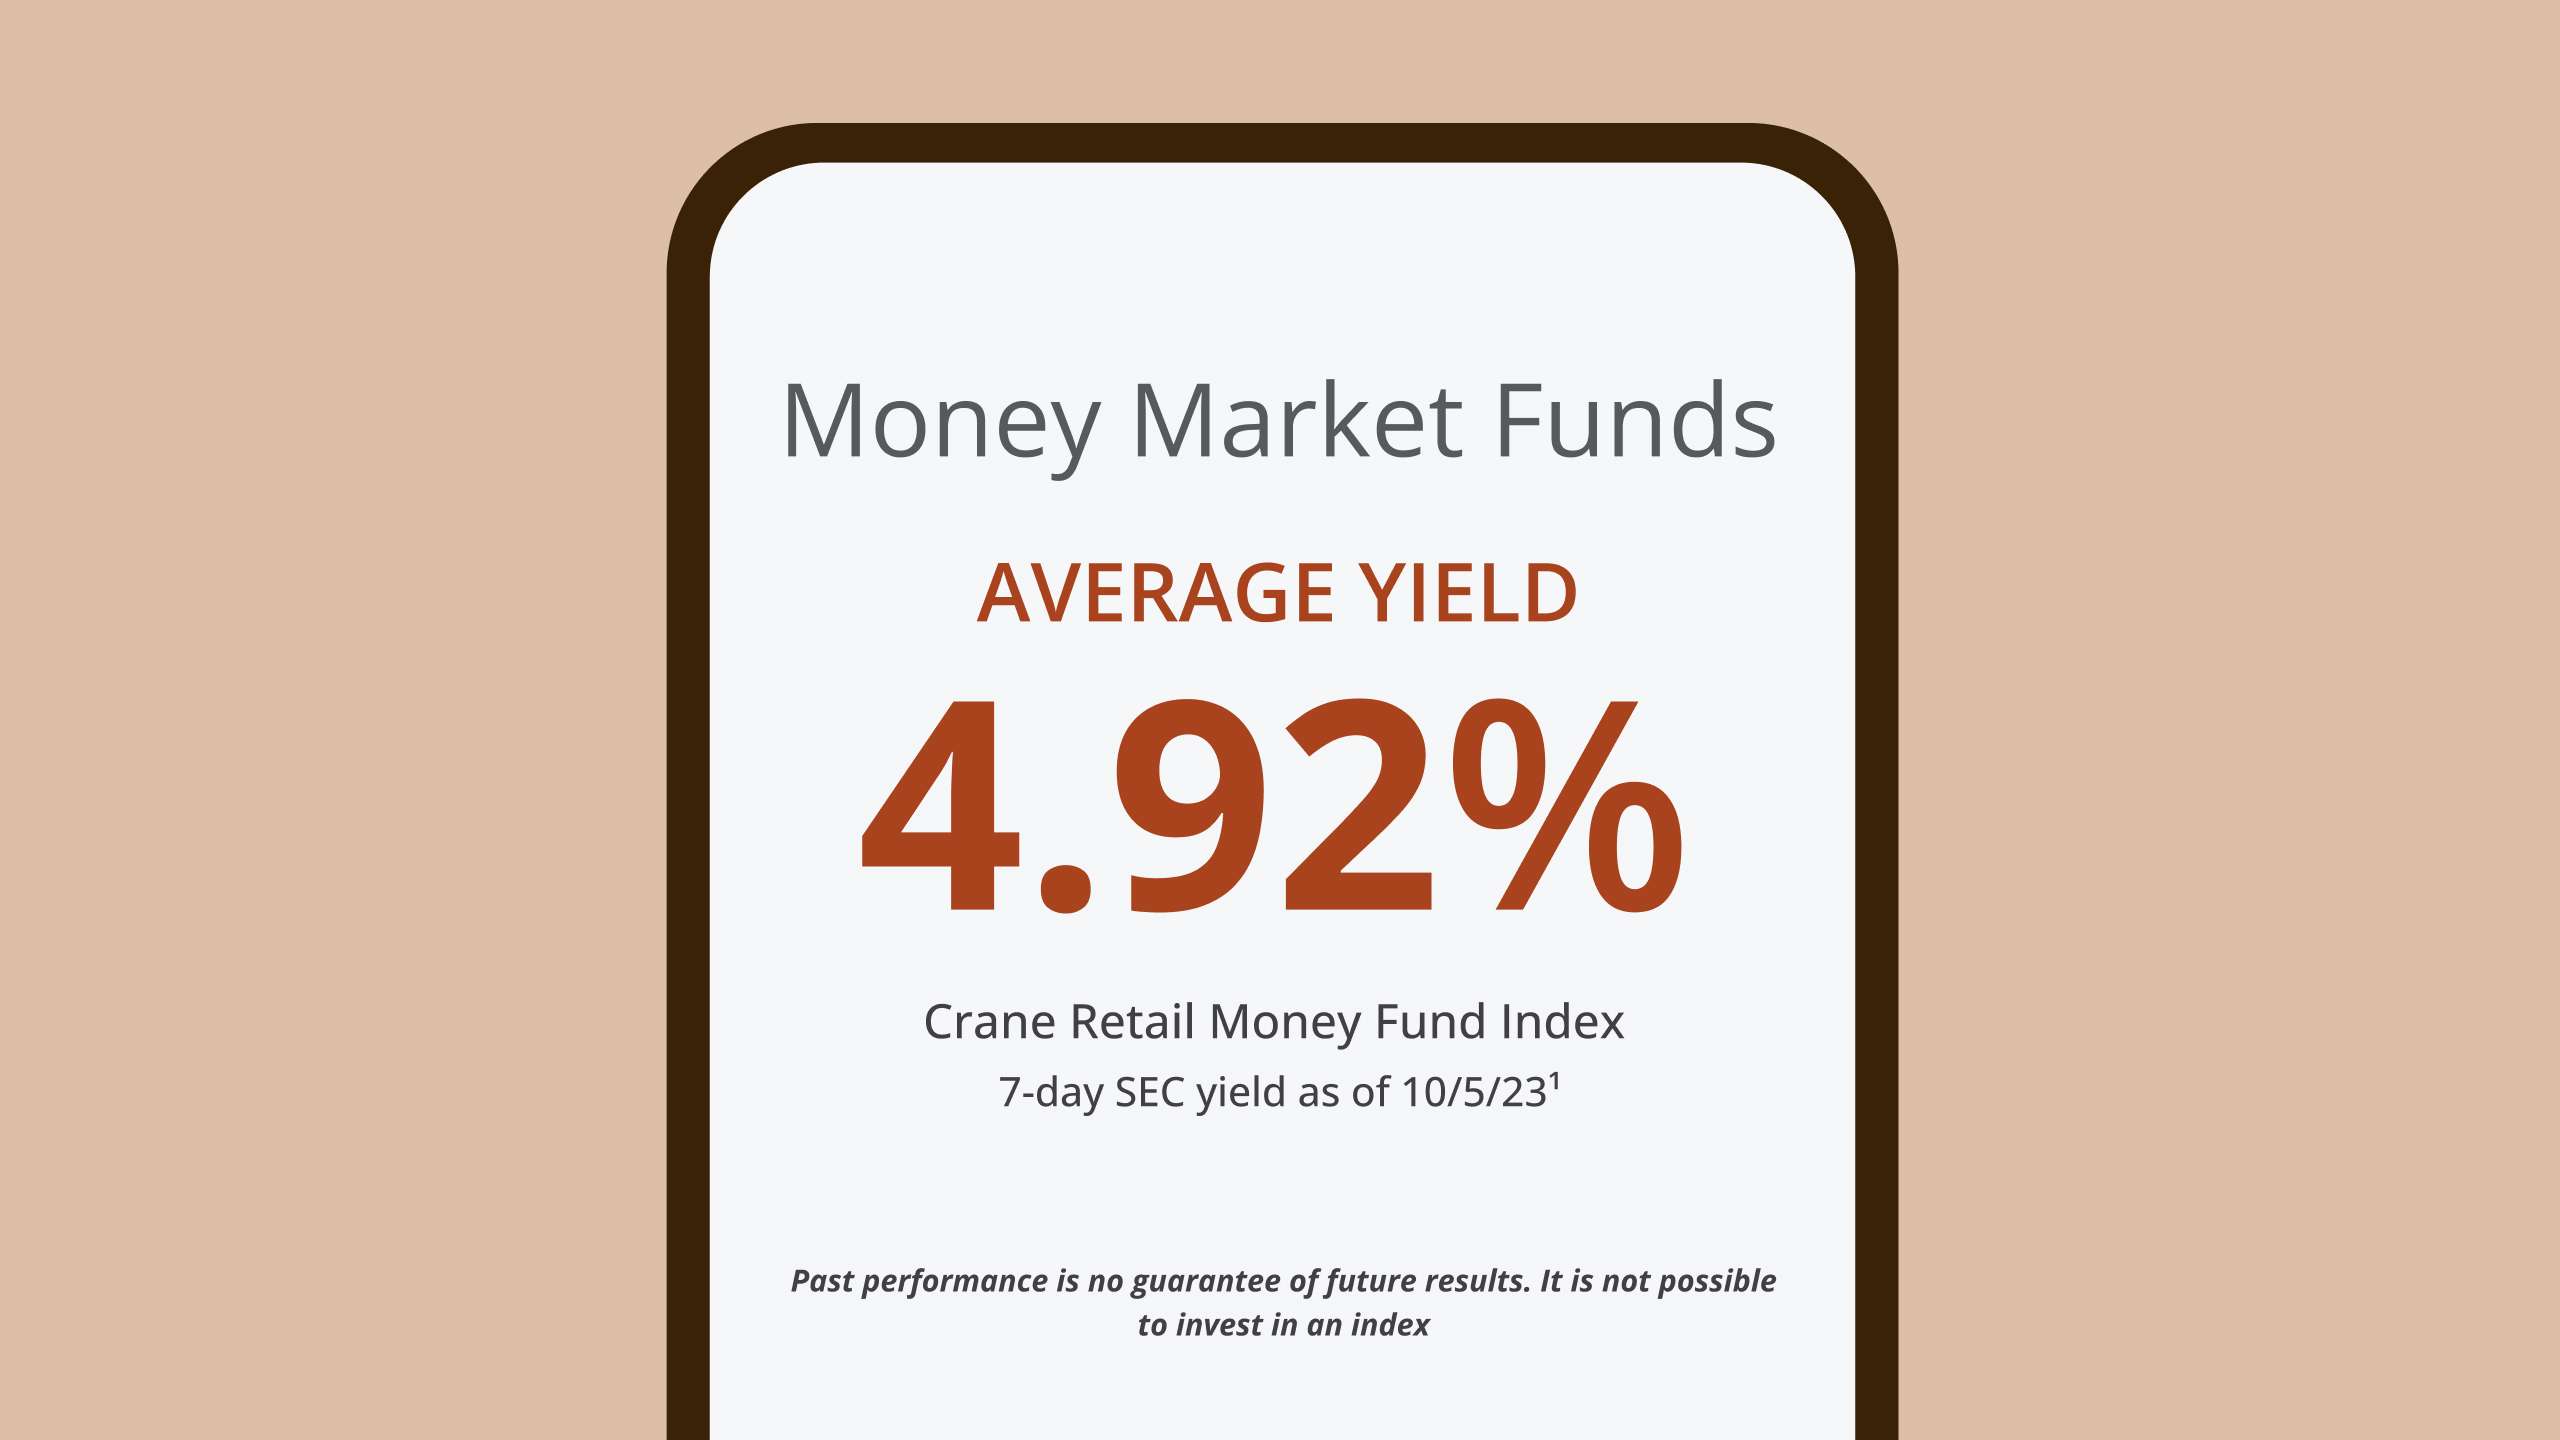 Money market funds 4.92% avg yield as per Crane data. Past performance is no guarantee of future results. It is not possible to invest in an index.